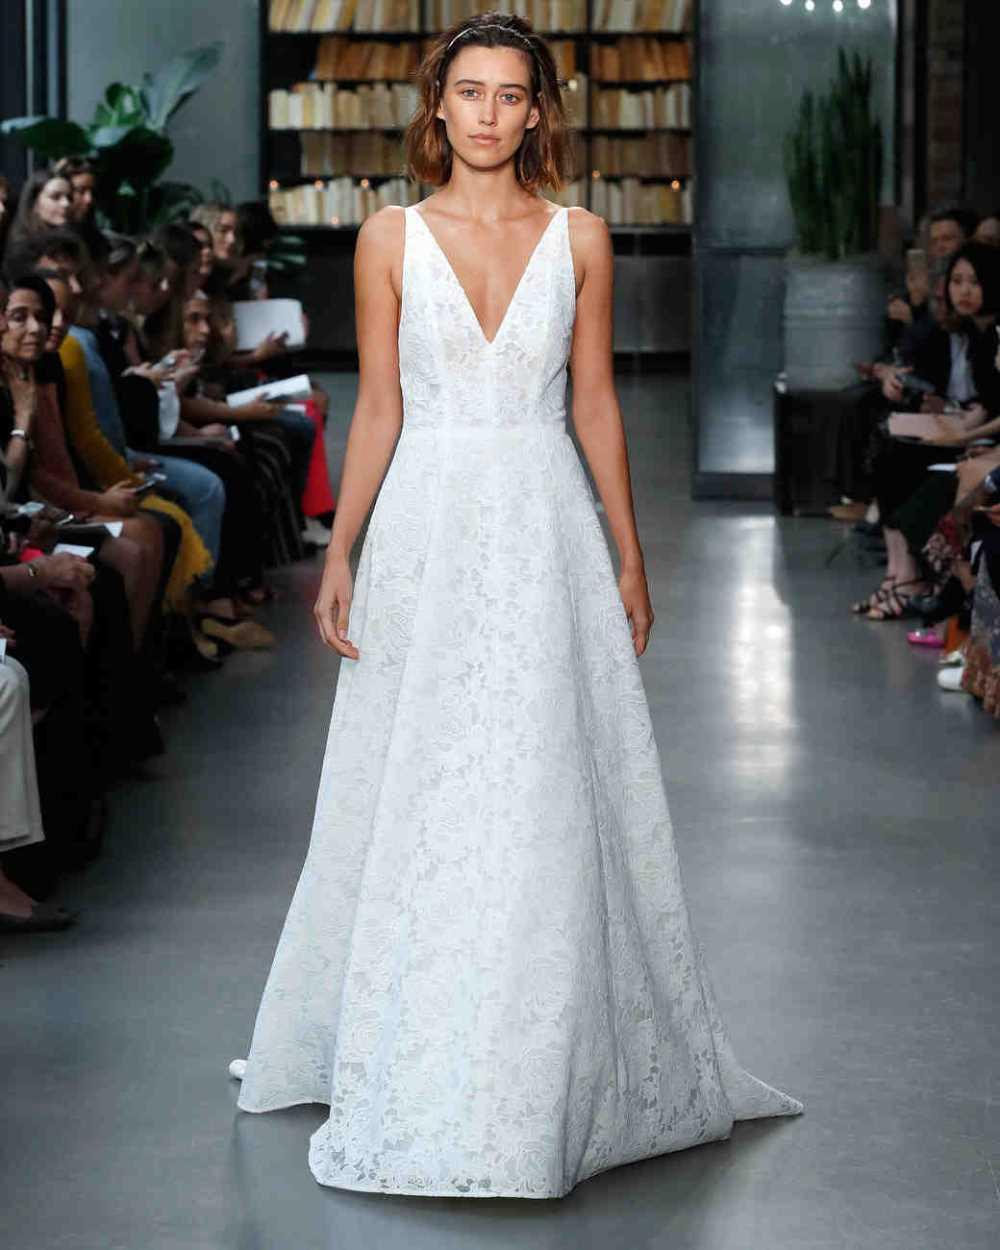 Amsale "Channing" Sample Gown